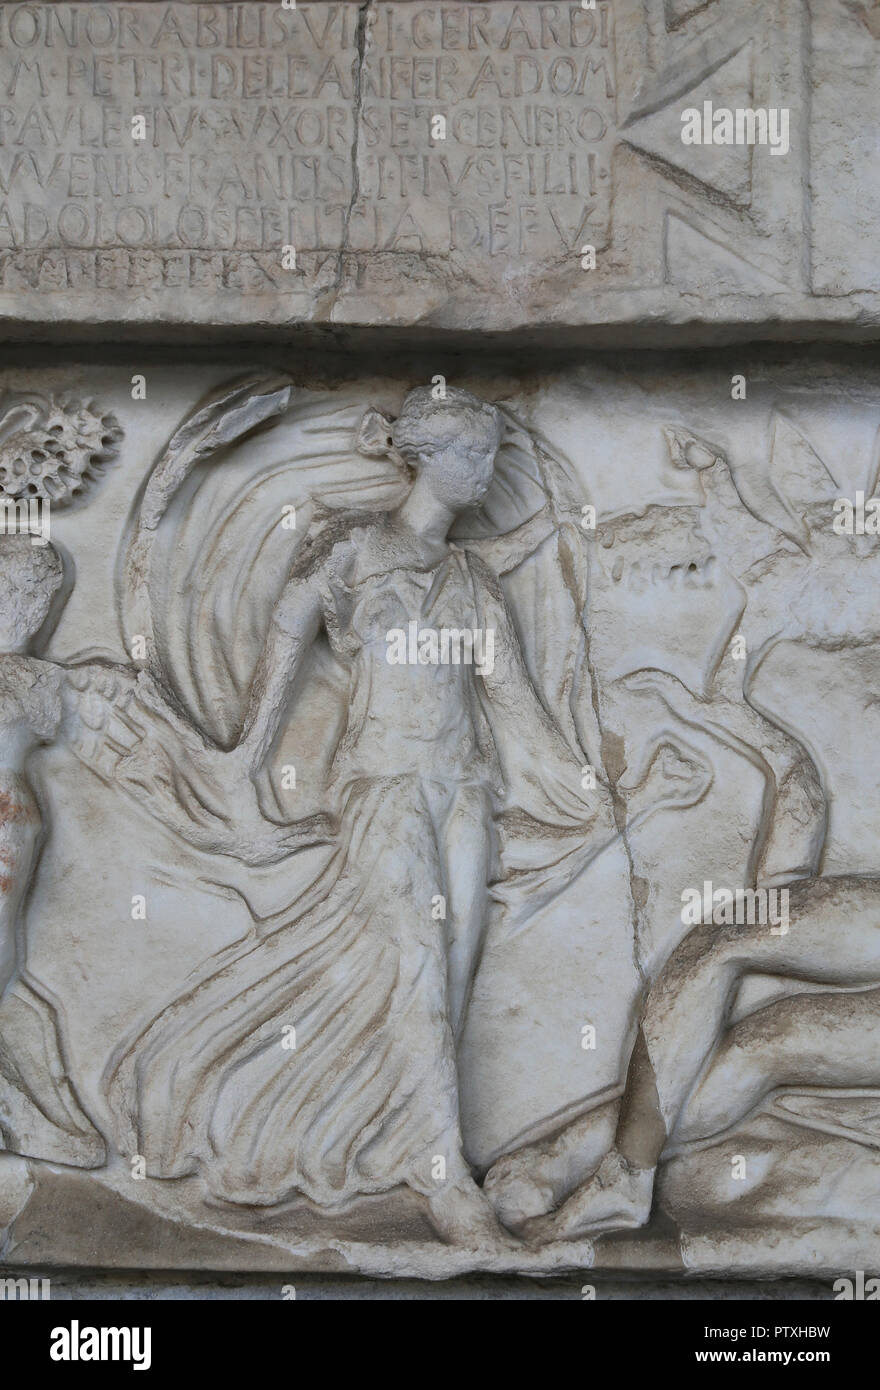 Italy. Pisa. CampoSanto. Roman sarcophagus. Relief: Myth of Selene and Endymion. c.190 CE. Marble. Detail figure of Selene. Stock Photo